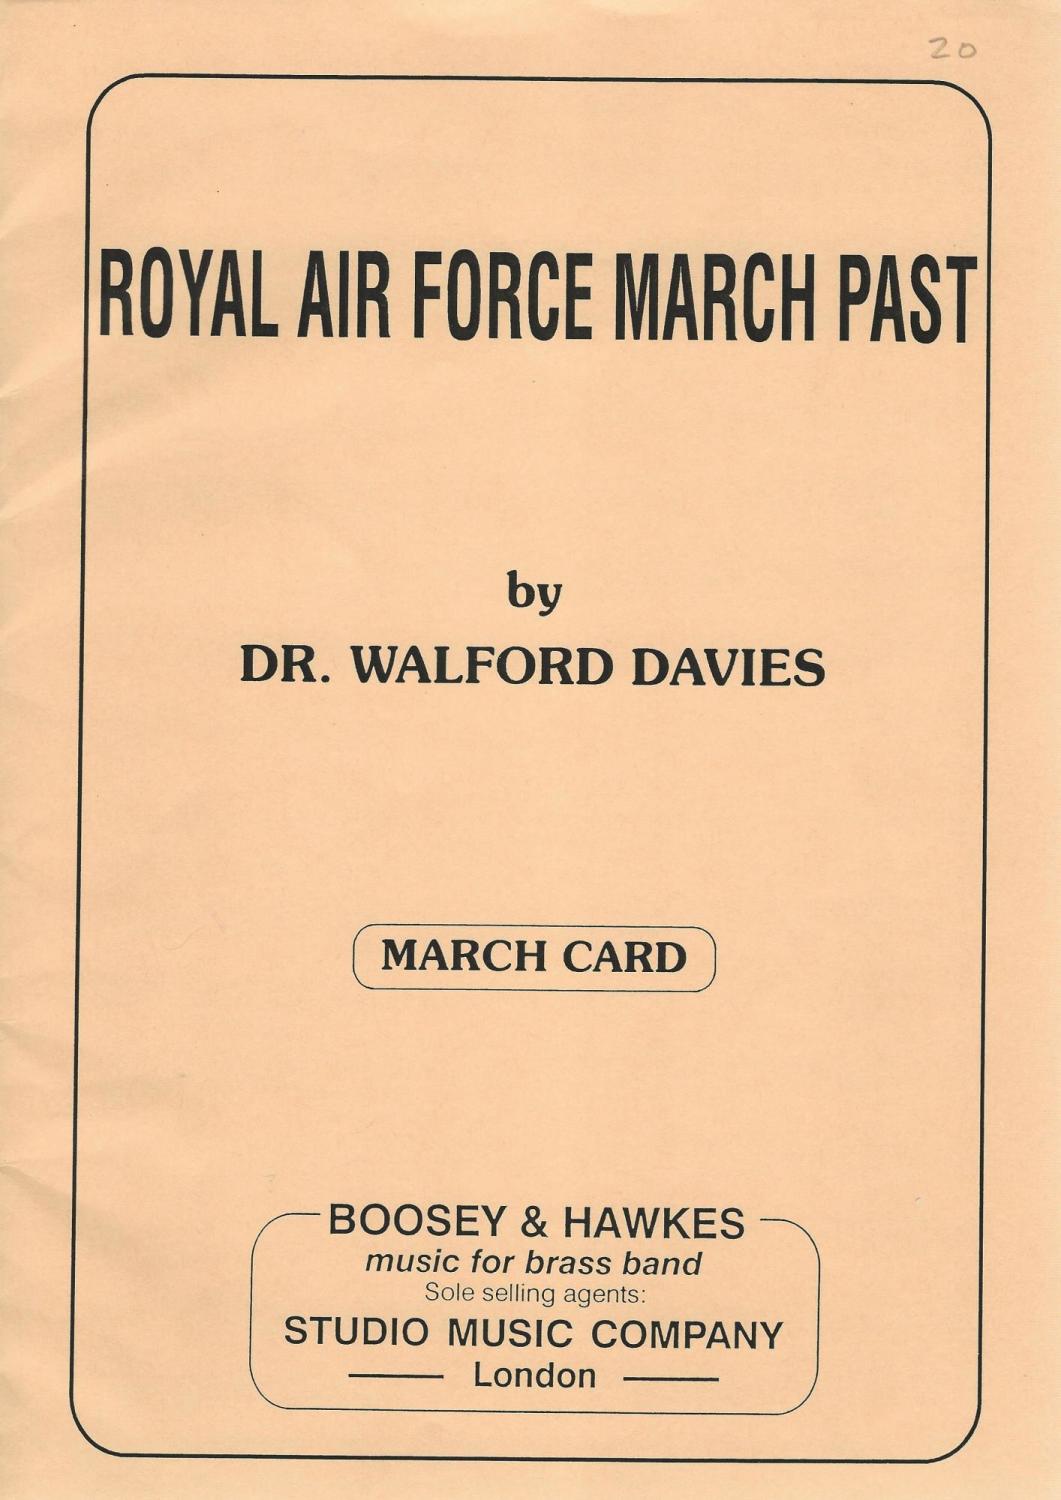 Royal Air Force March Past for Brass Band - Dr. Walford Davies